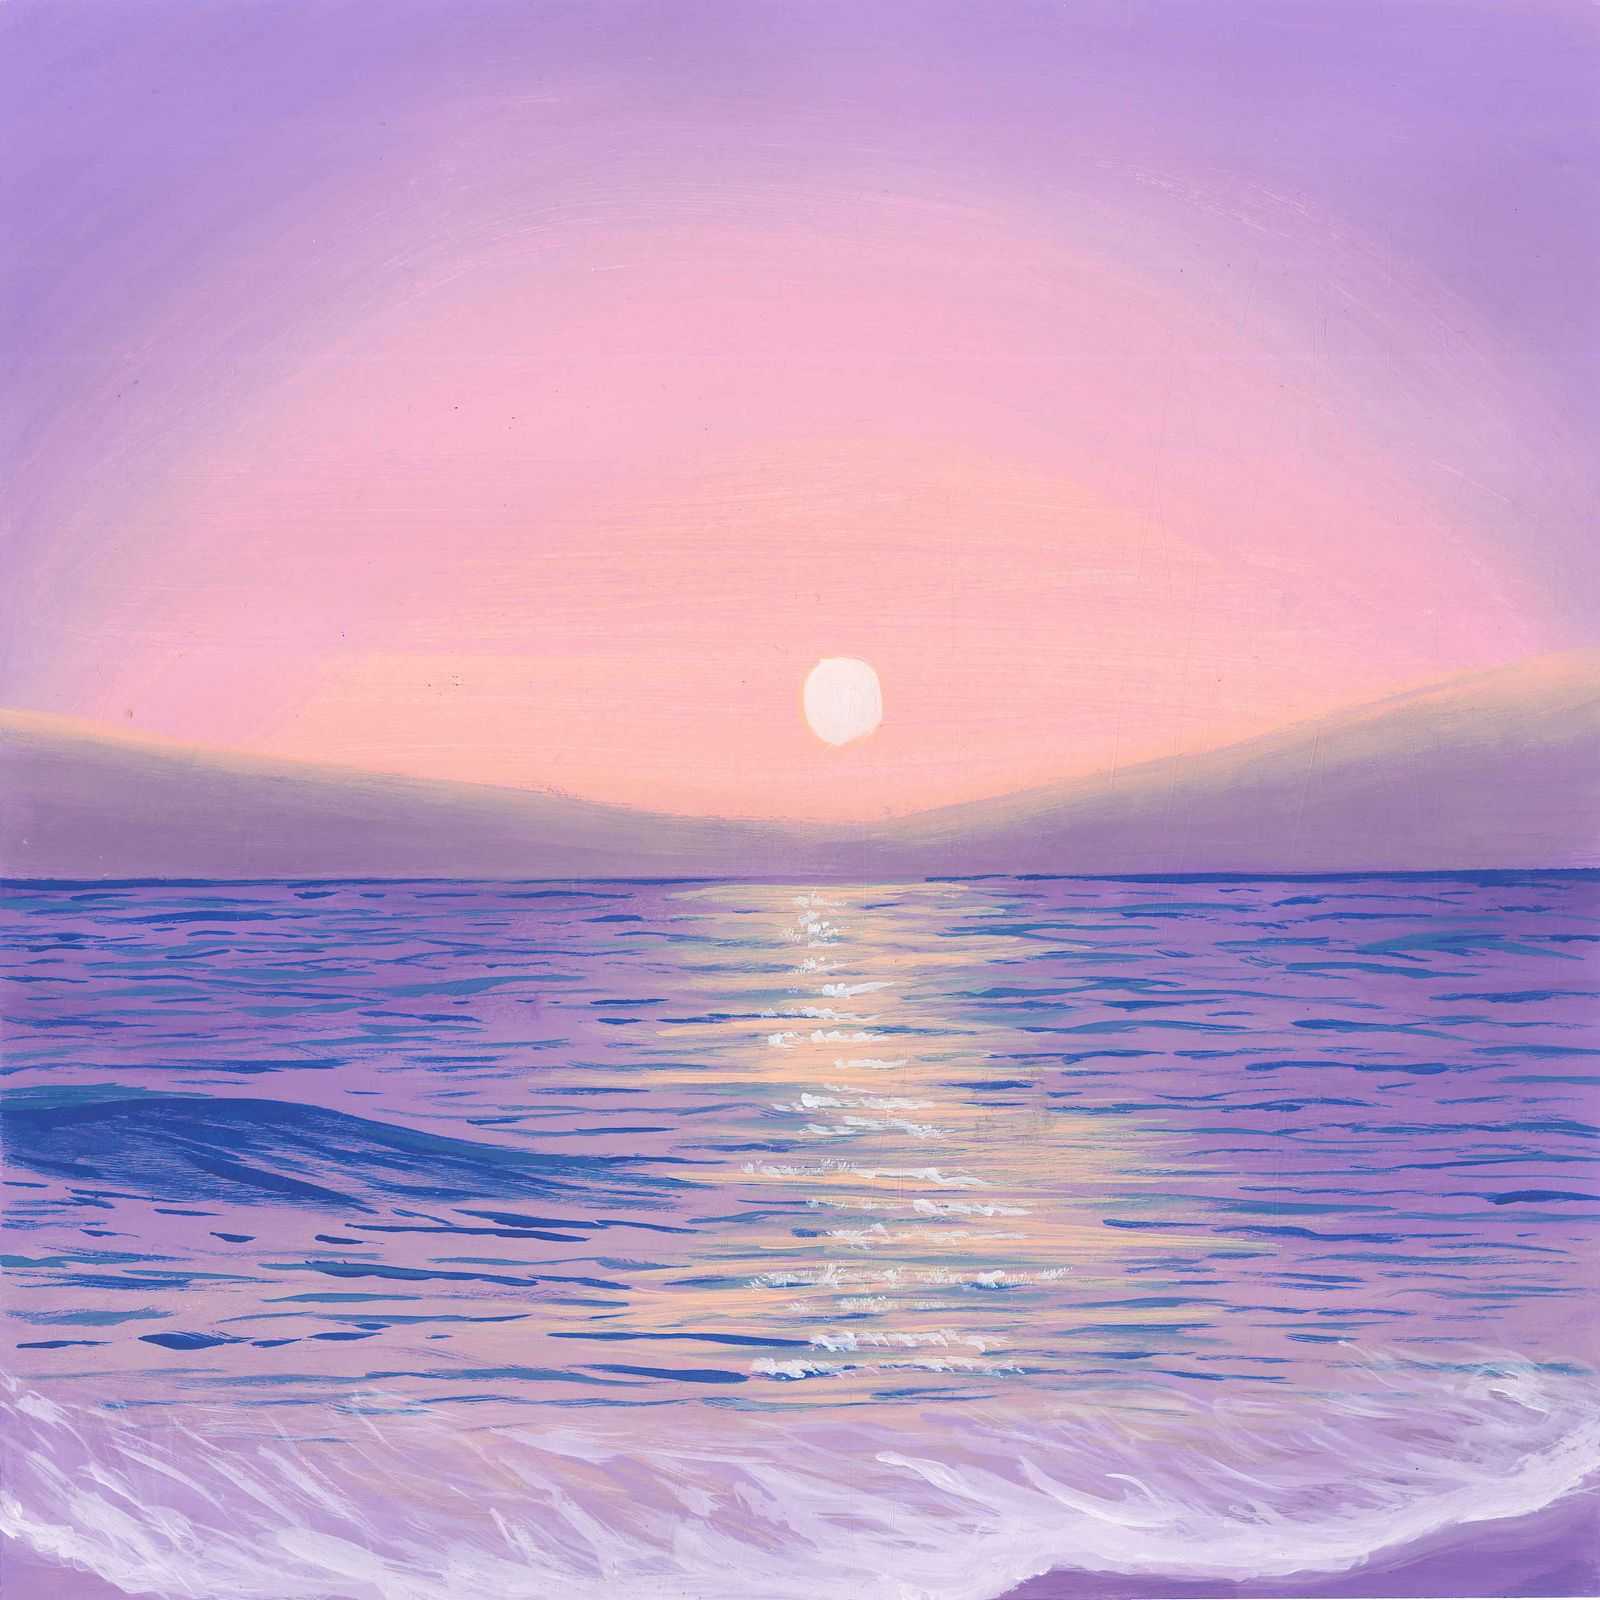 Gentle Waves on a North Sea Beach - nature landscape painting - earth.fm